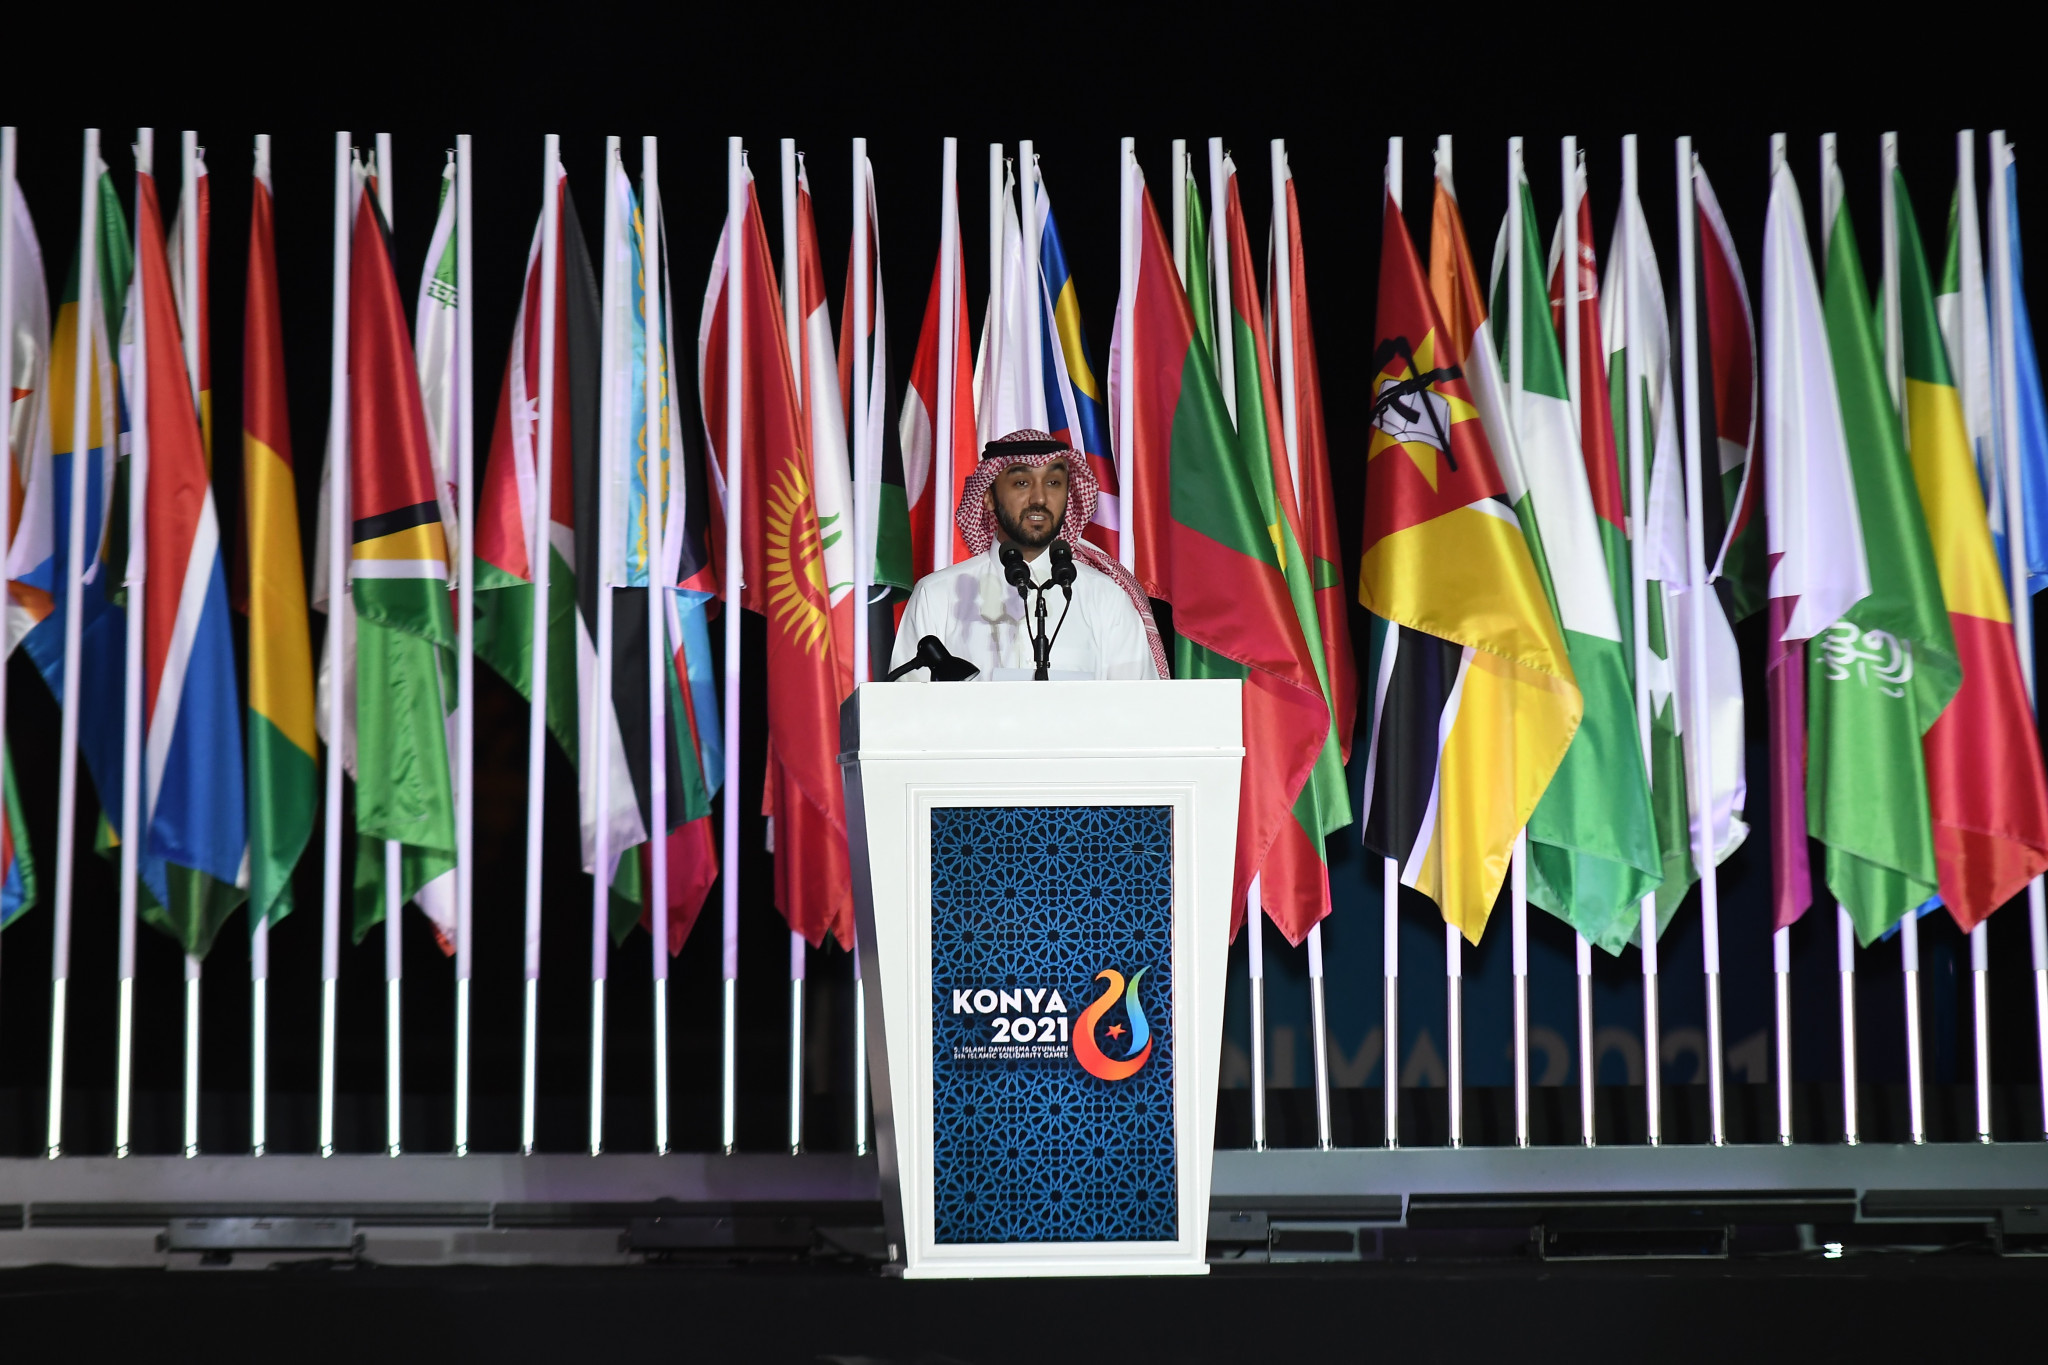 ISSF President hails "exceptional" Islamic Solidarity Games at Closing Ceremony